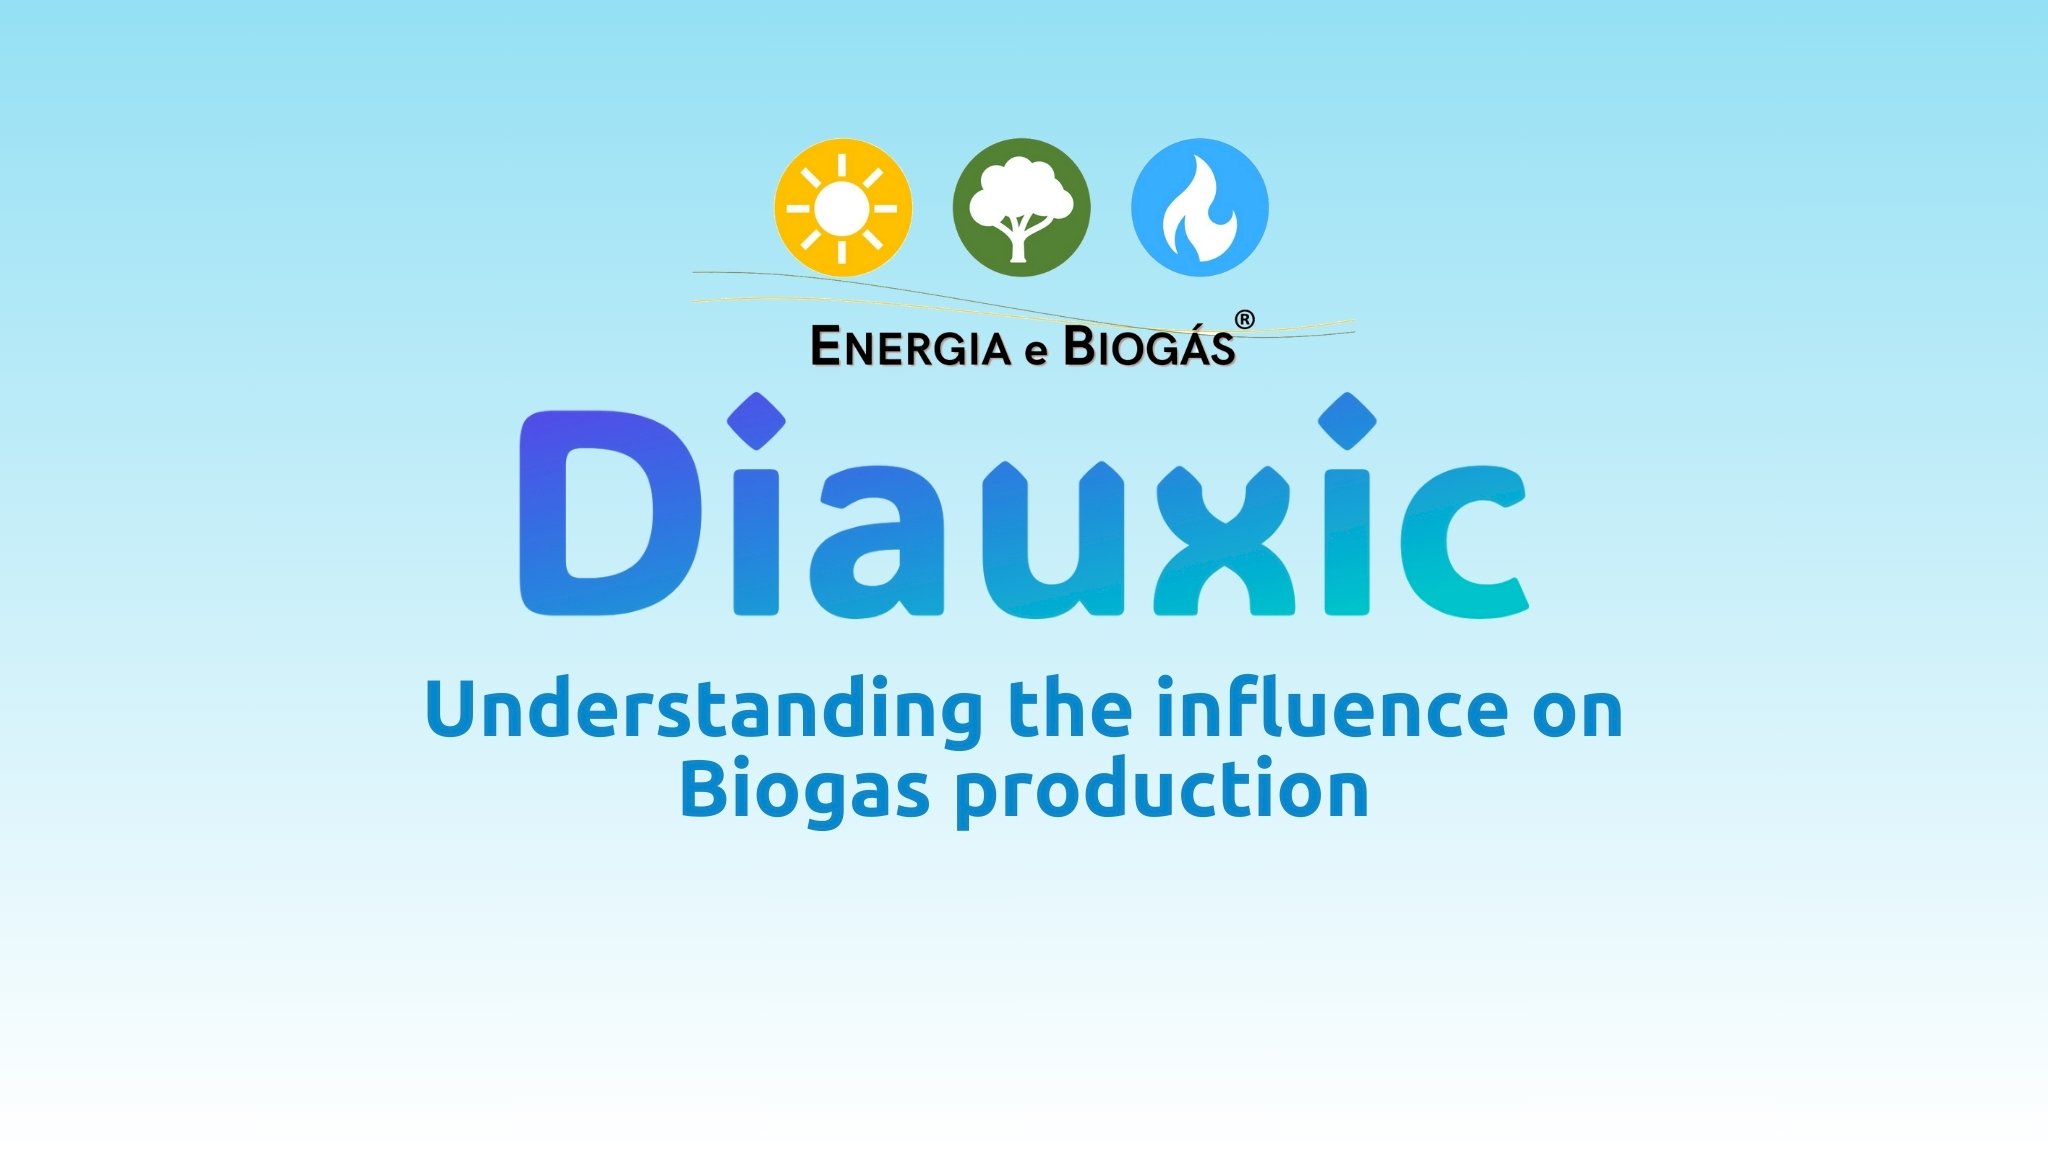 What is diauxic?